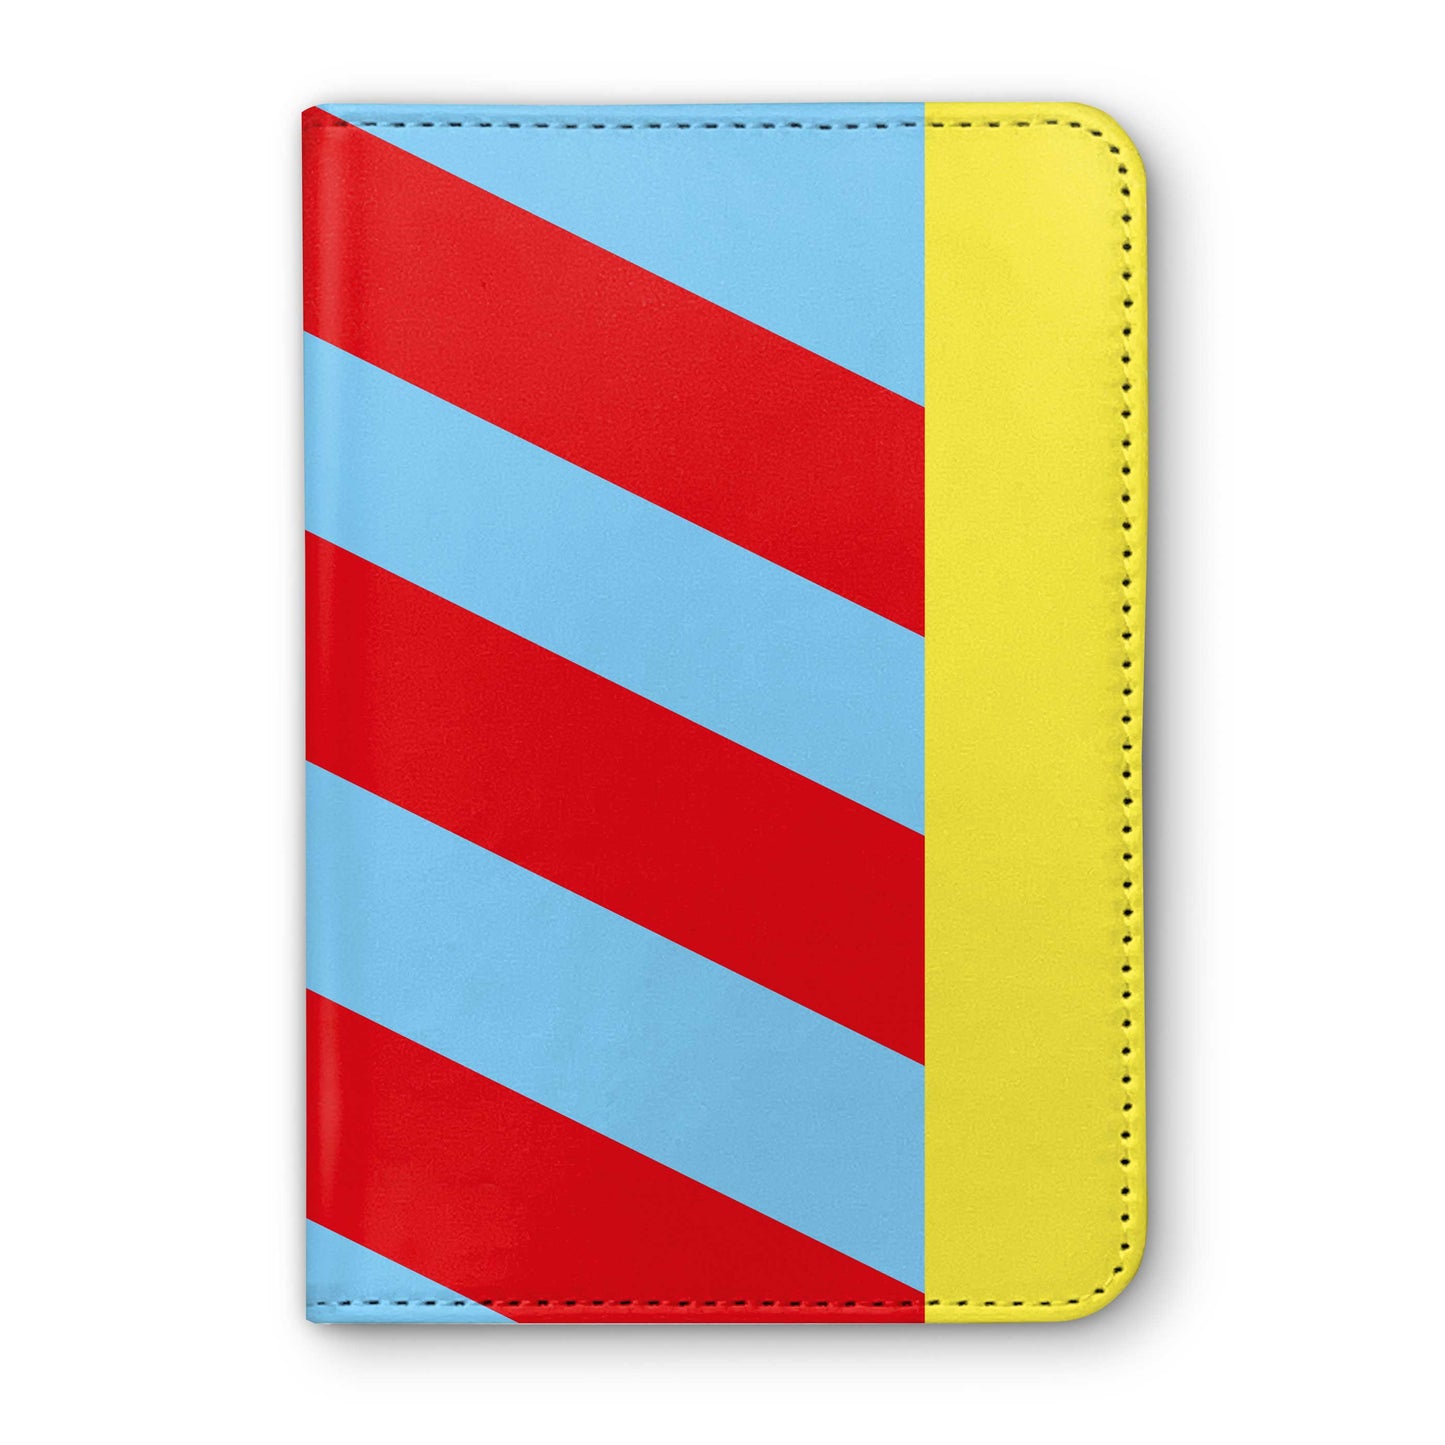 Neil Mulholland Racing Club Horse Racing Passport Holder - Hacked Up Horse Racing Gifts